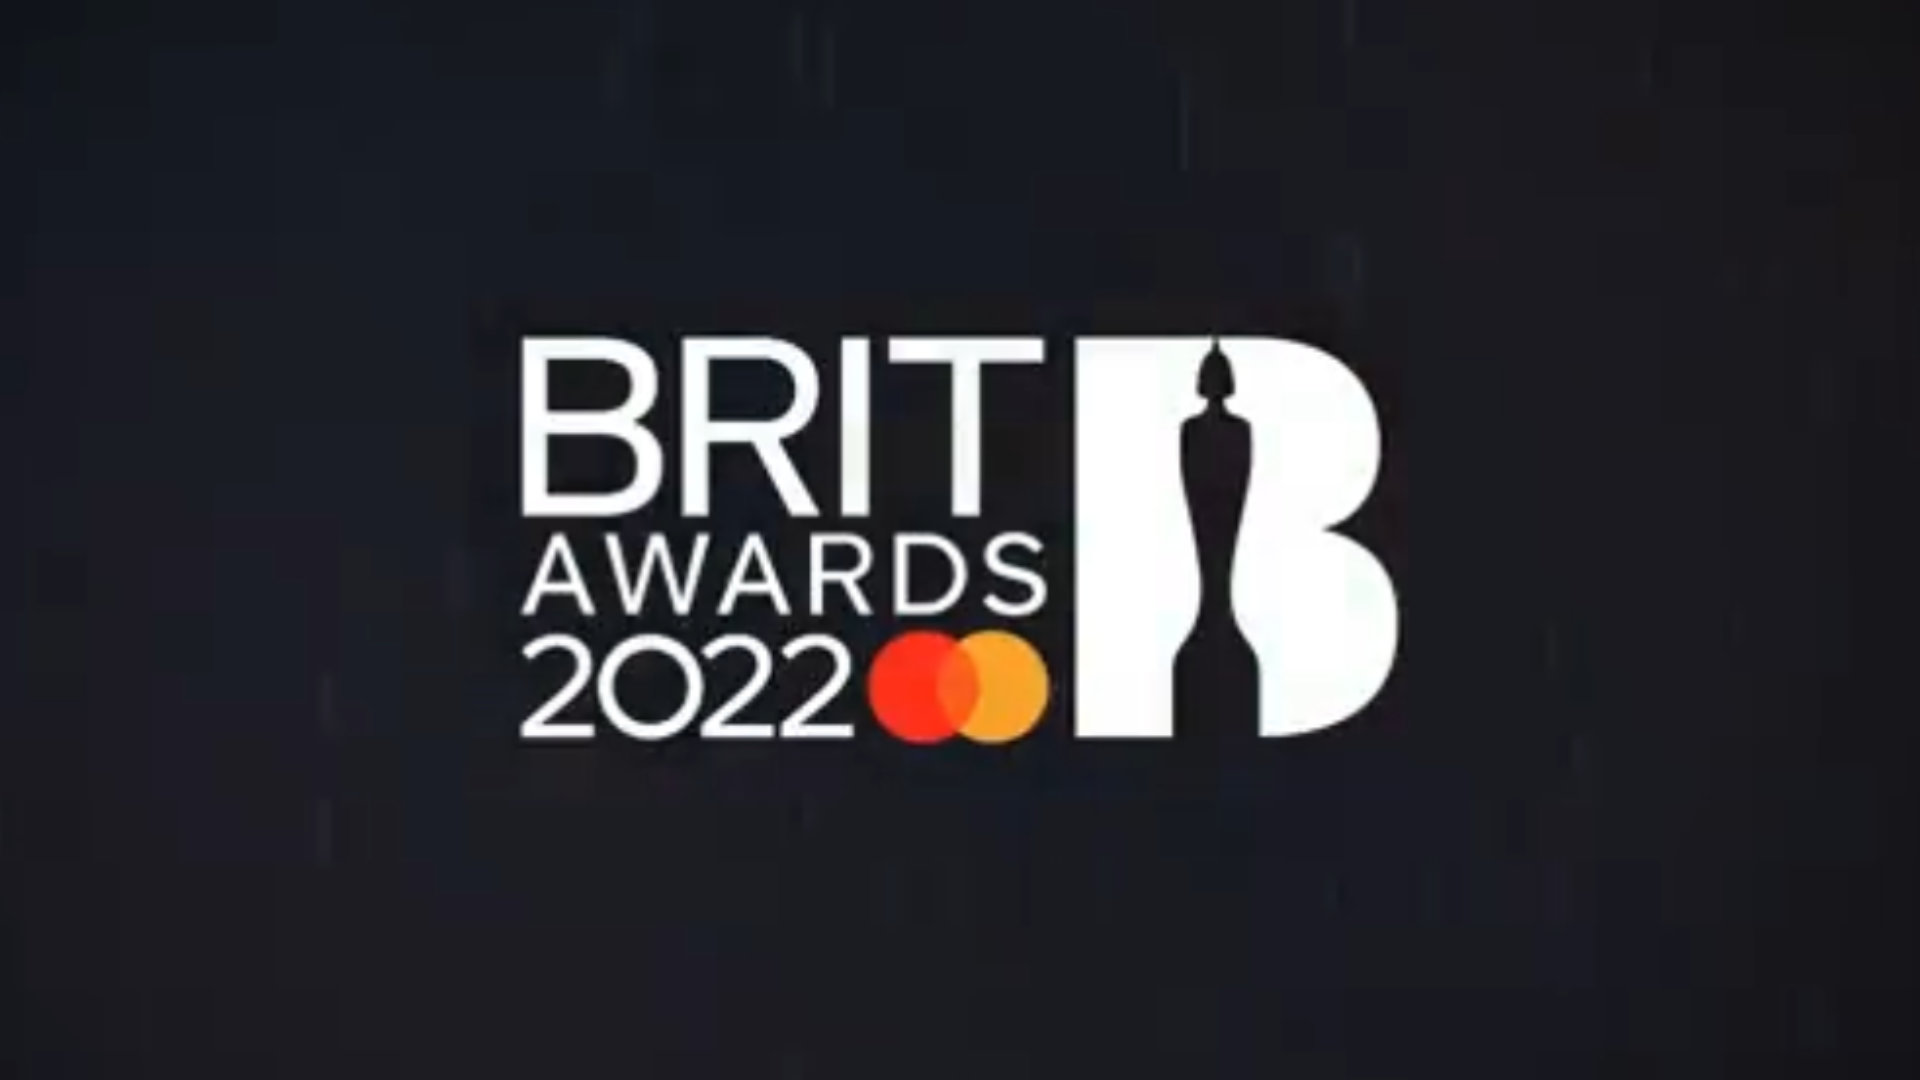 The Brits 2022